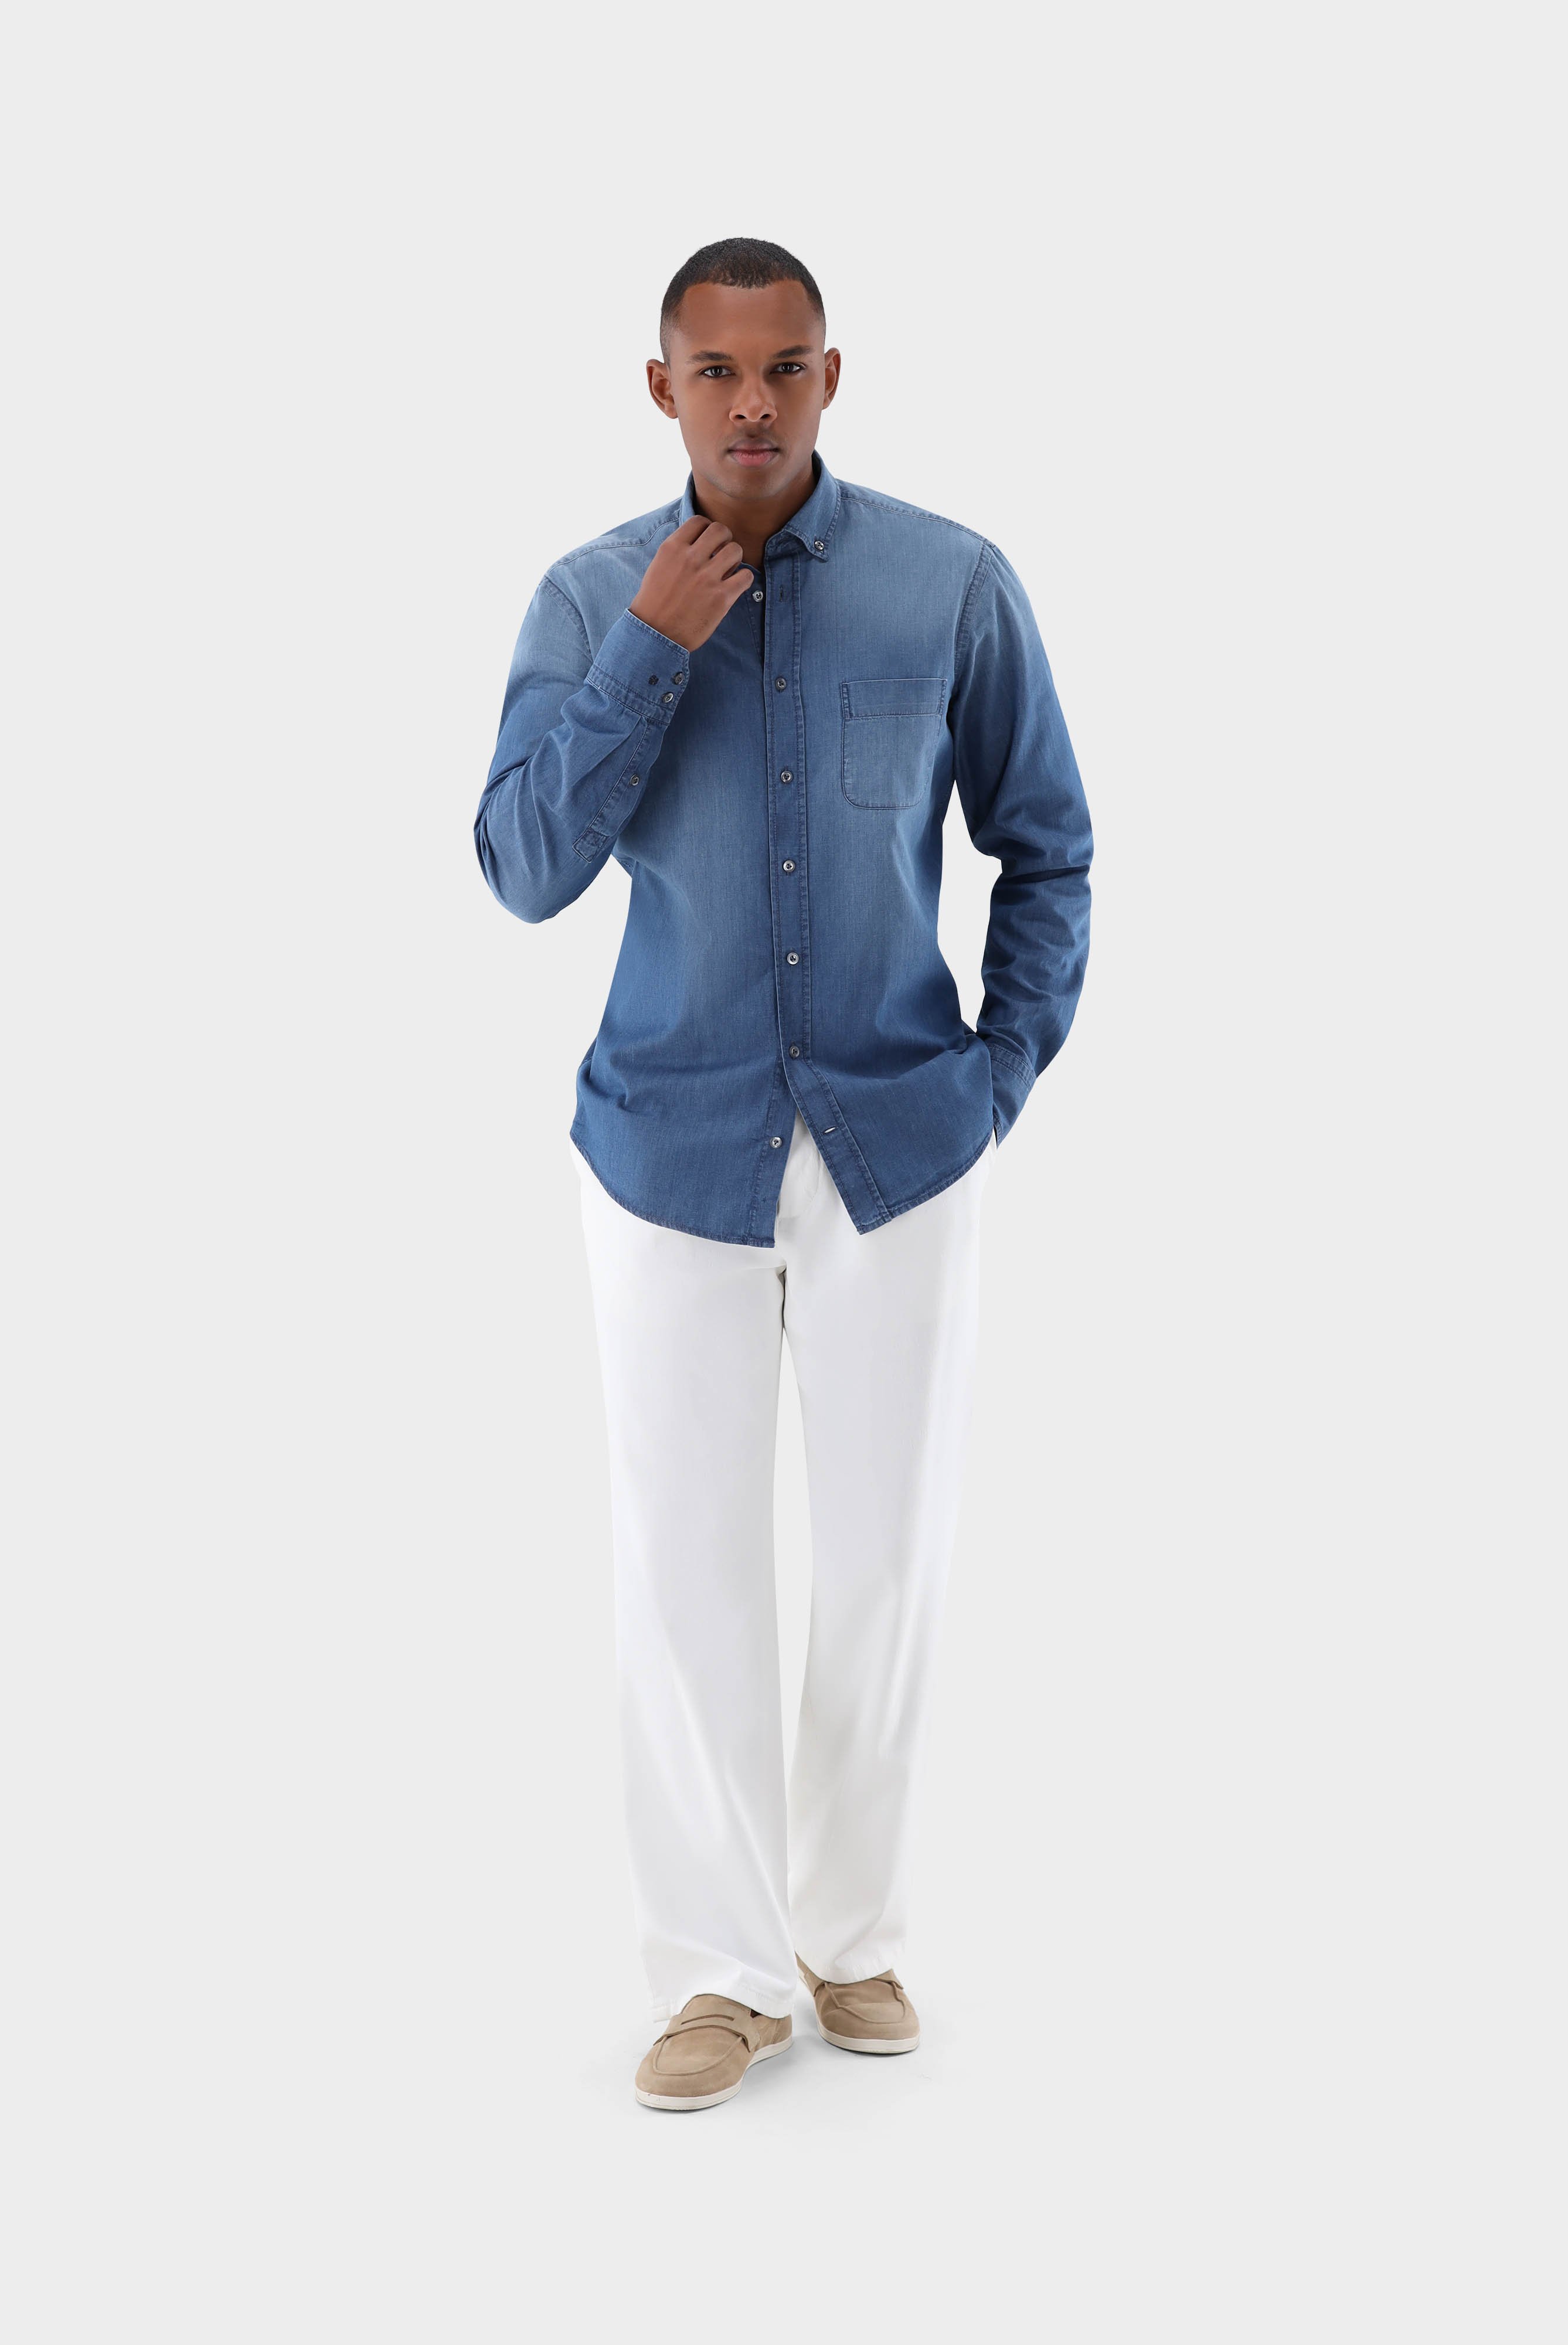 Casual Shirts+Jeans Hemd Tailor Fit+20.2013.ET.155330.740.39